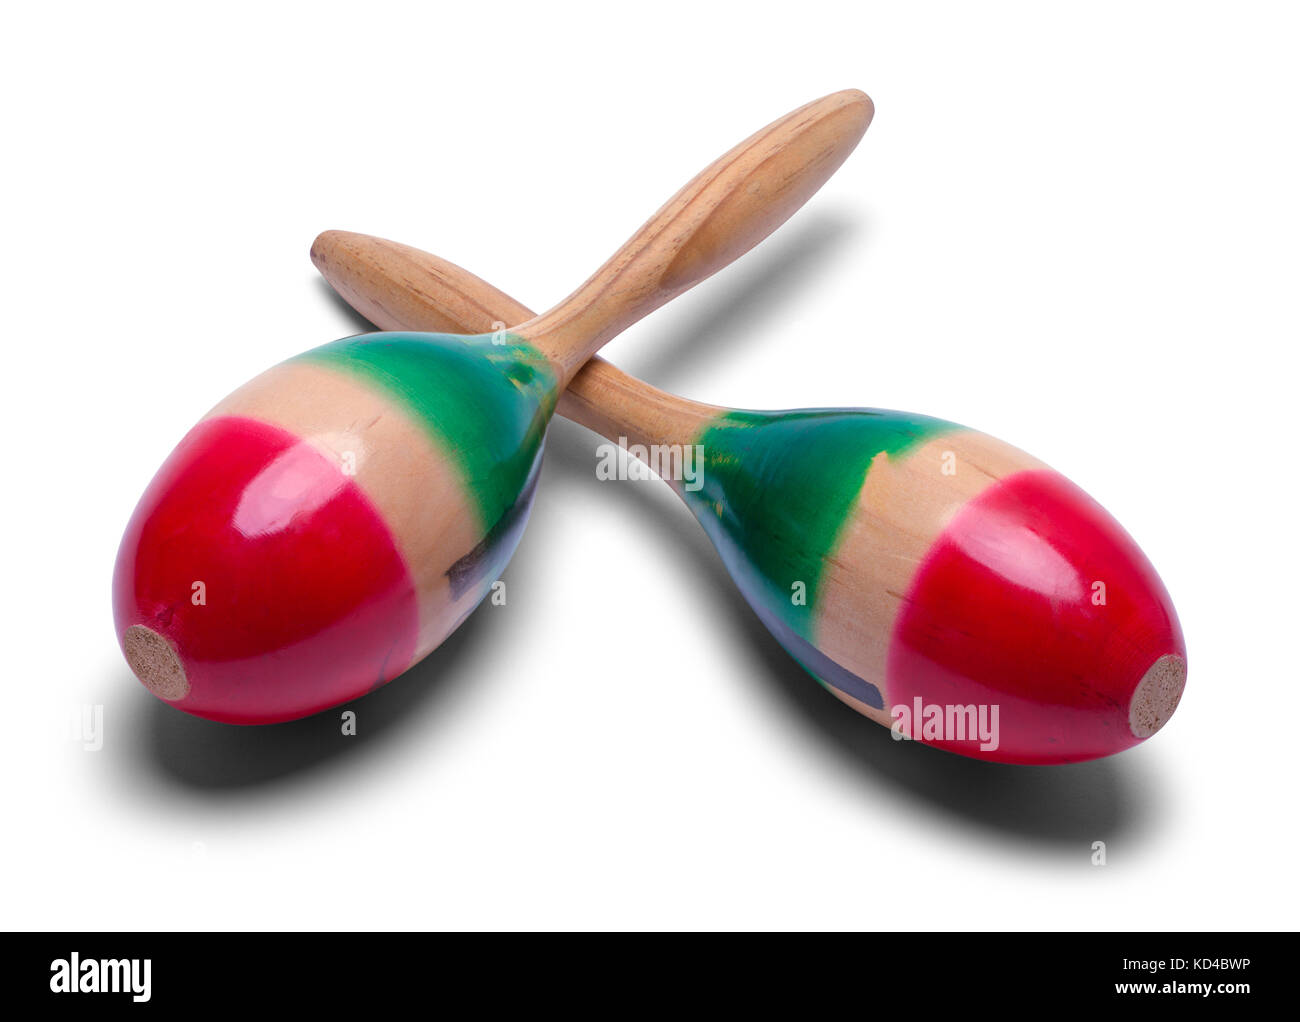 Two Wood Maracas Isolated on a White Background. Stock Photo